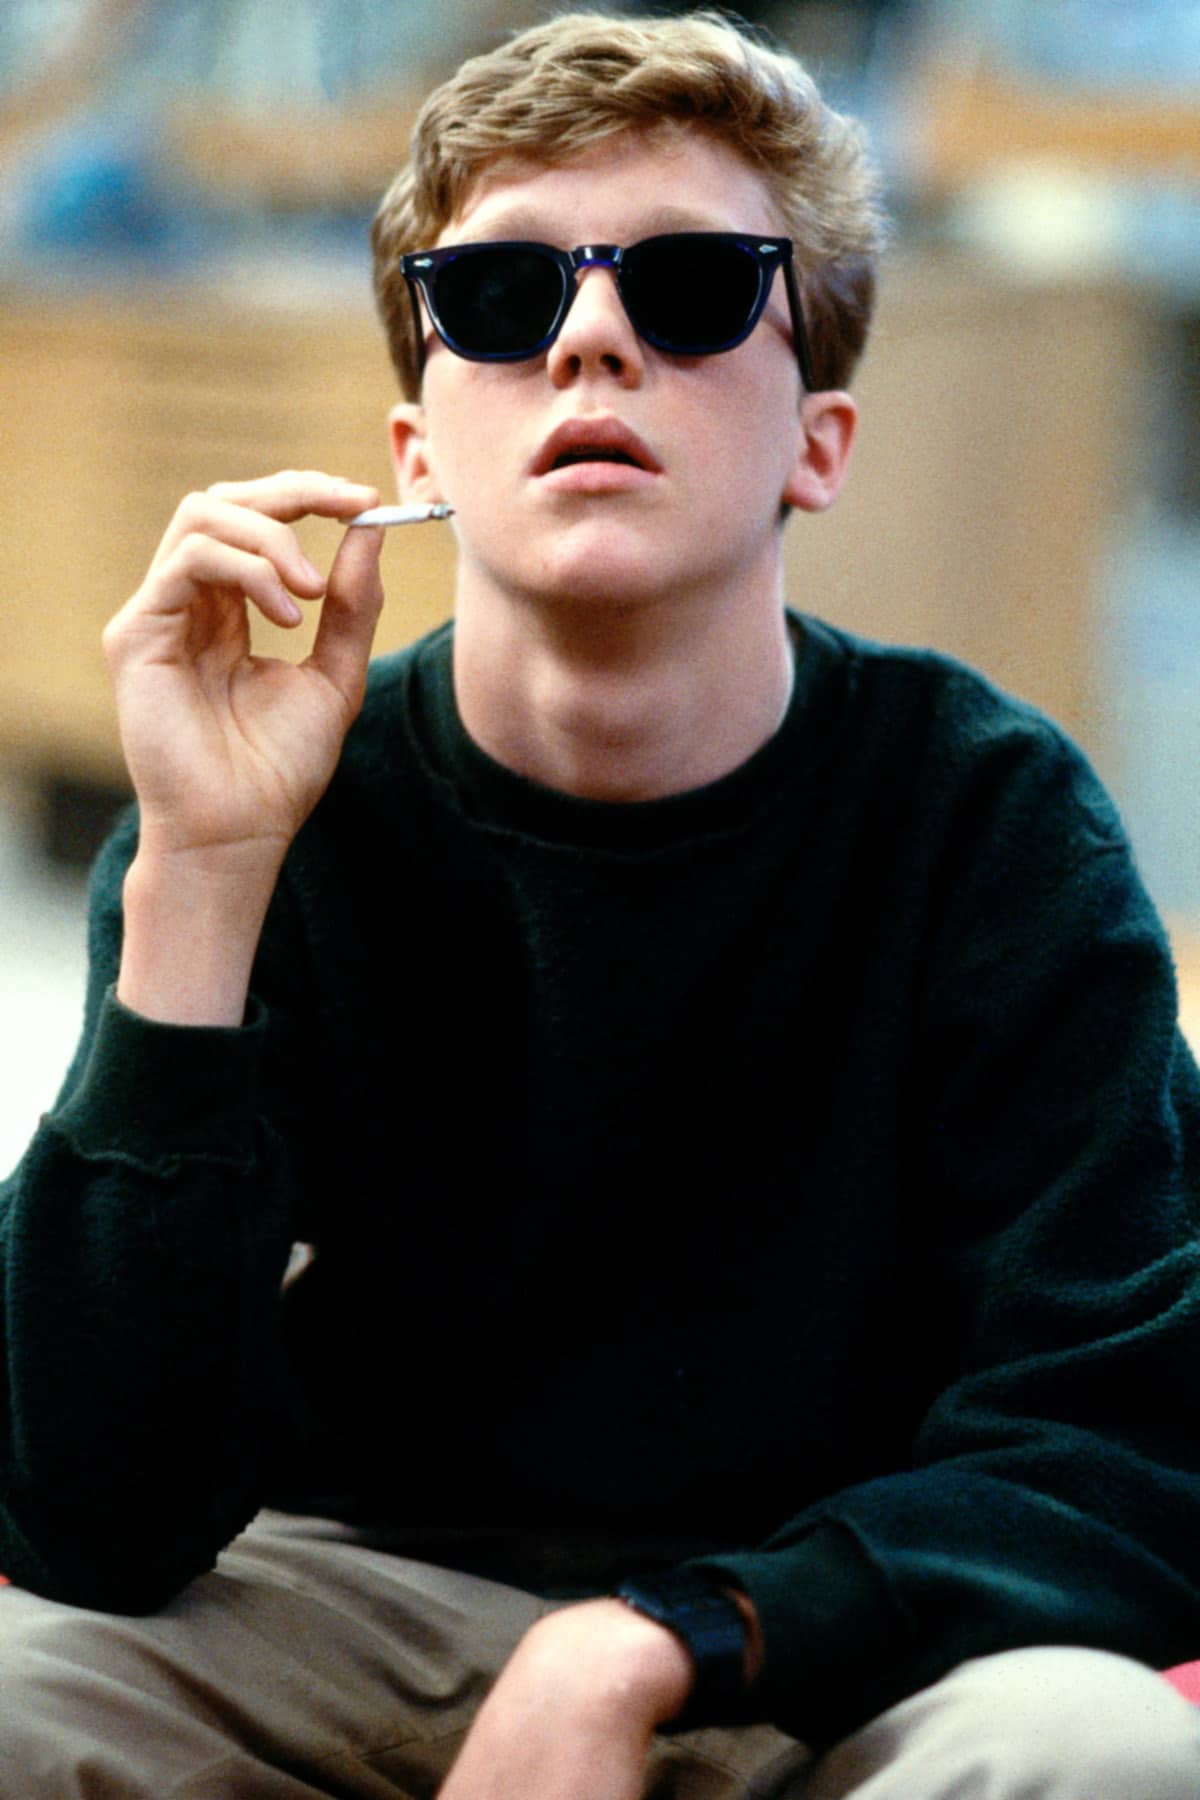 THE BREAKFAST CLUB, Anthony Michael Hall, 1985